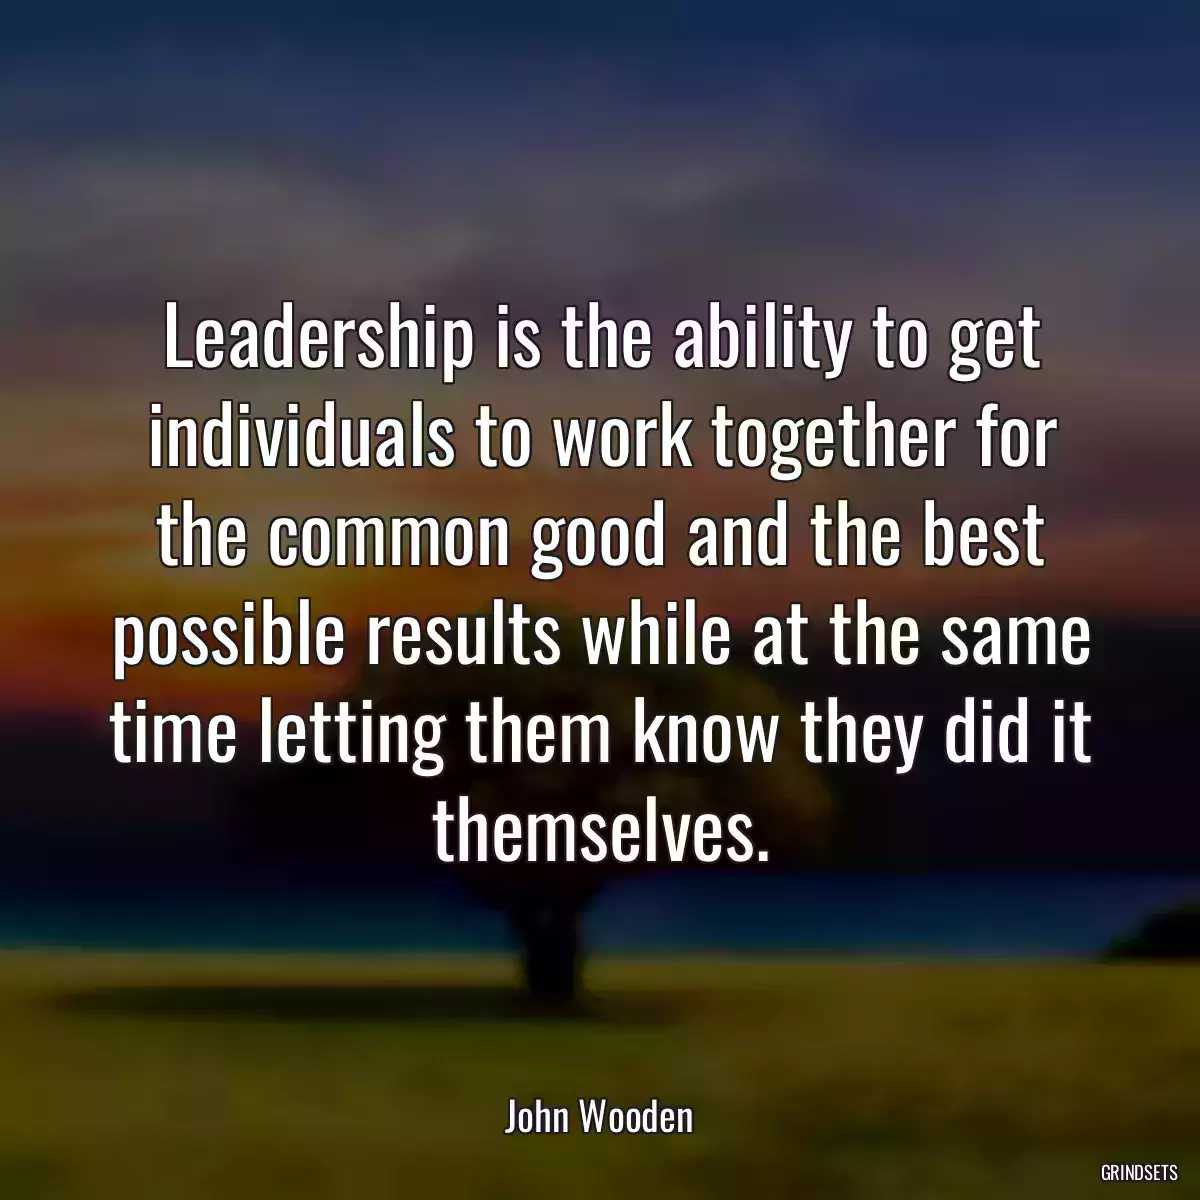 Leadership is the ability to get individuals to work together for the common good and the best possible results while at the same time letting them know they did it themselves.